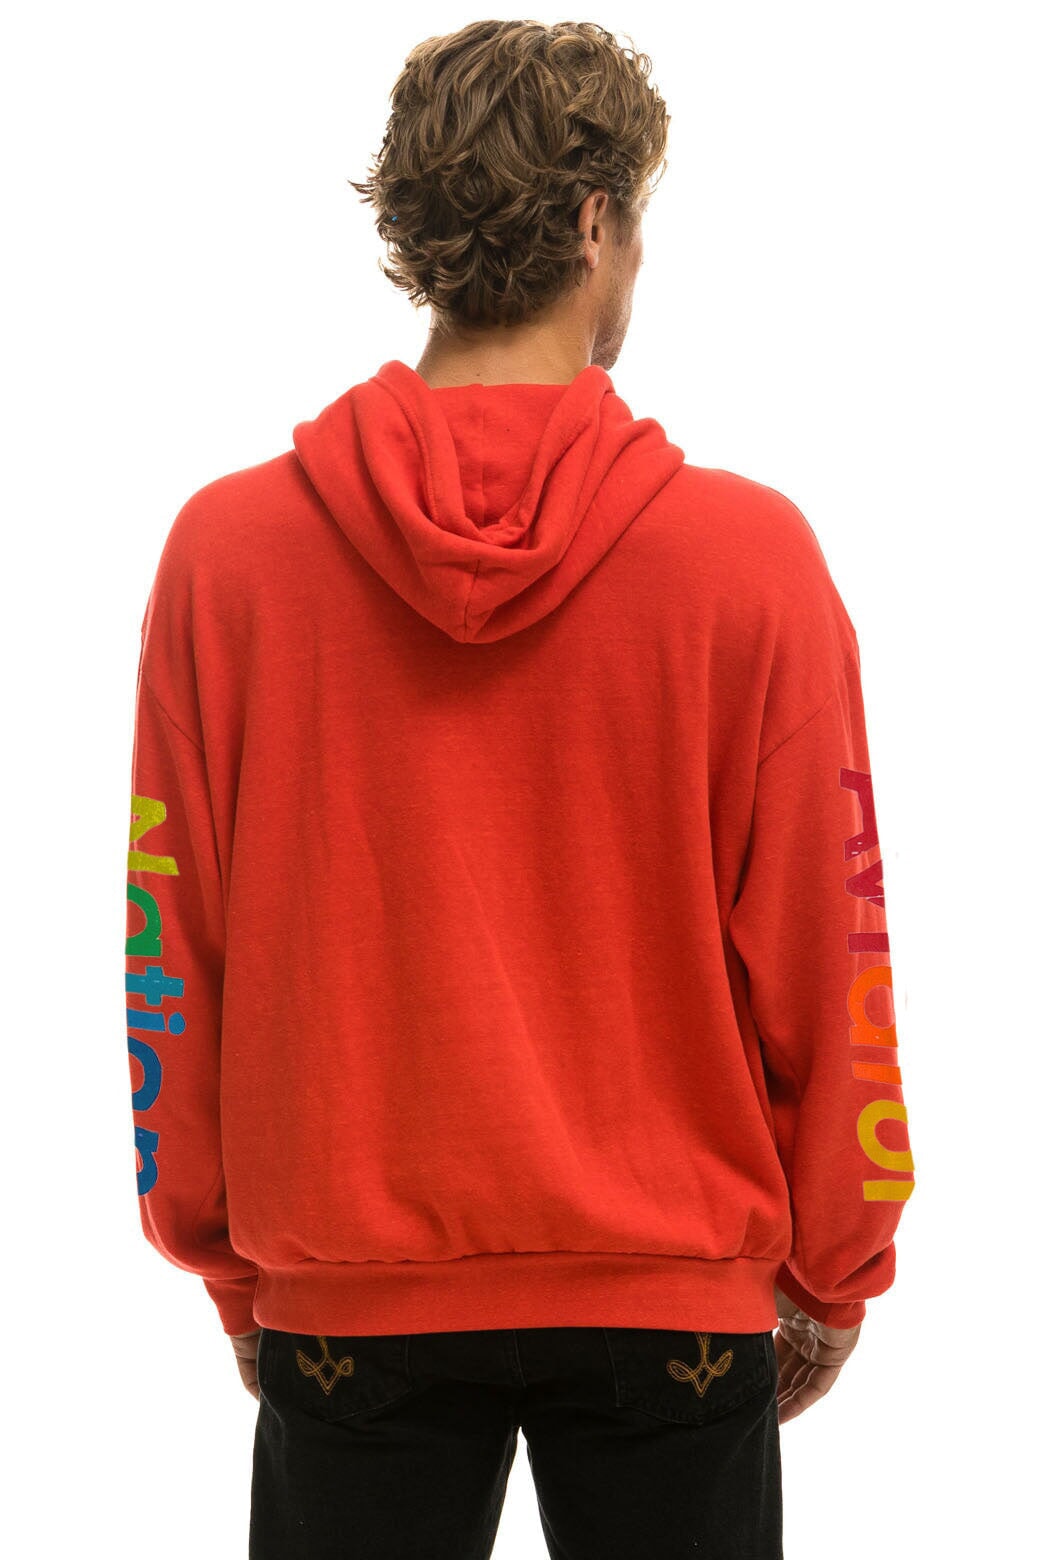 AVIATOR NATION MALIBU RELAXED PULLOVER HOODIE - RED Hoodie Aviator Nation 